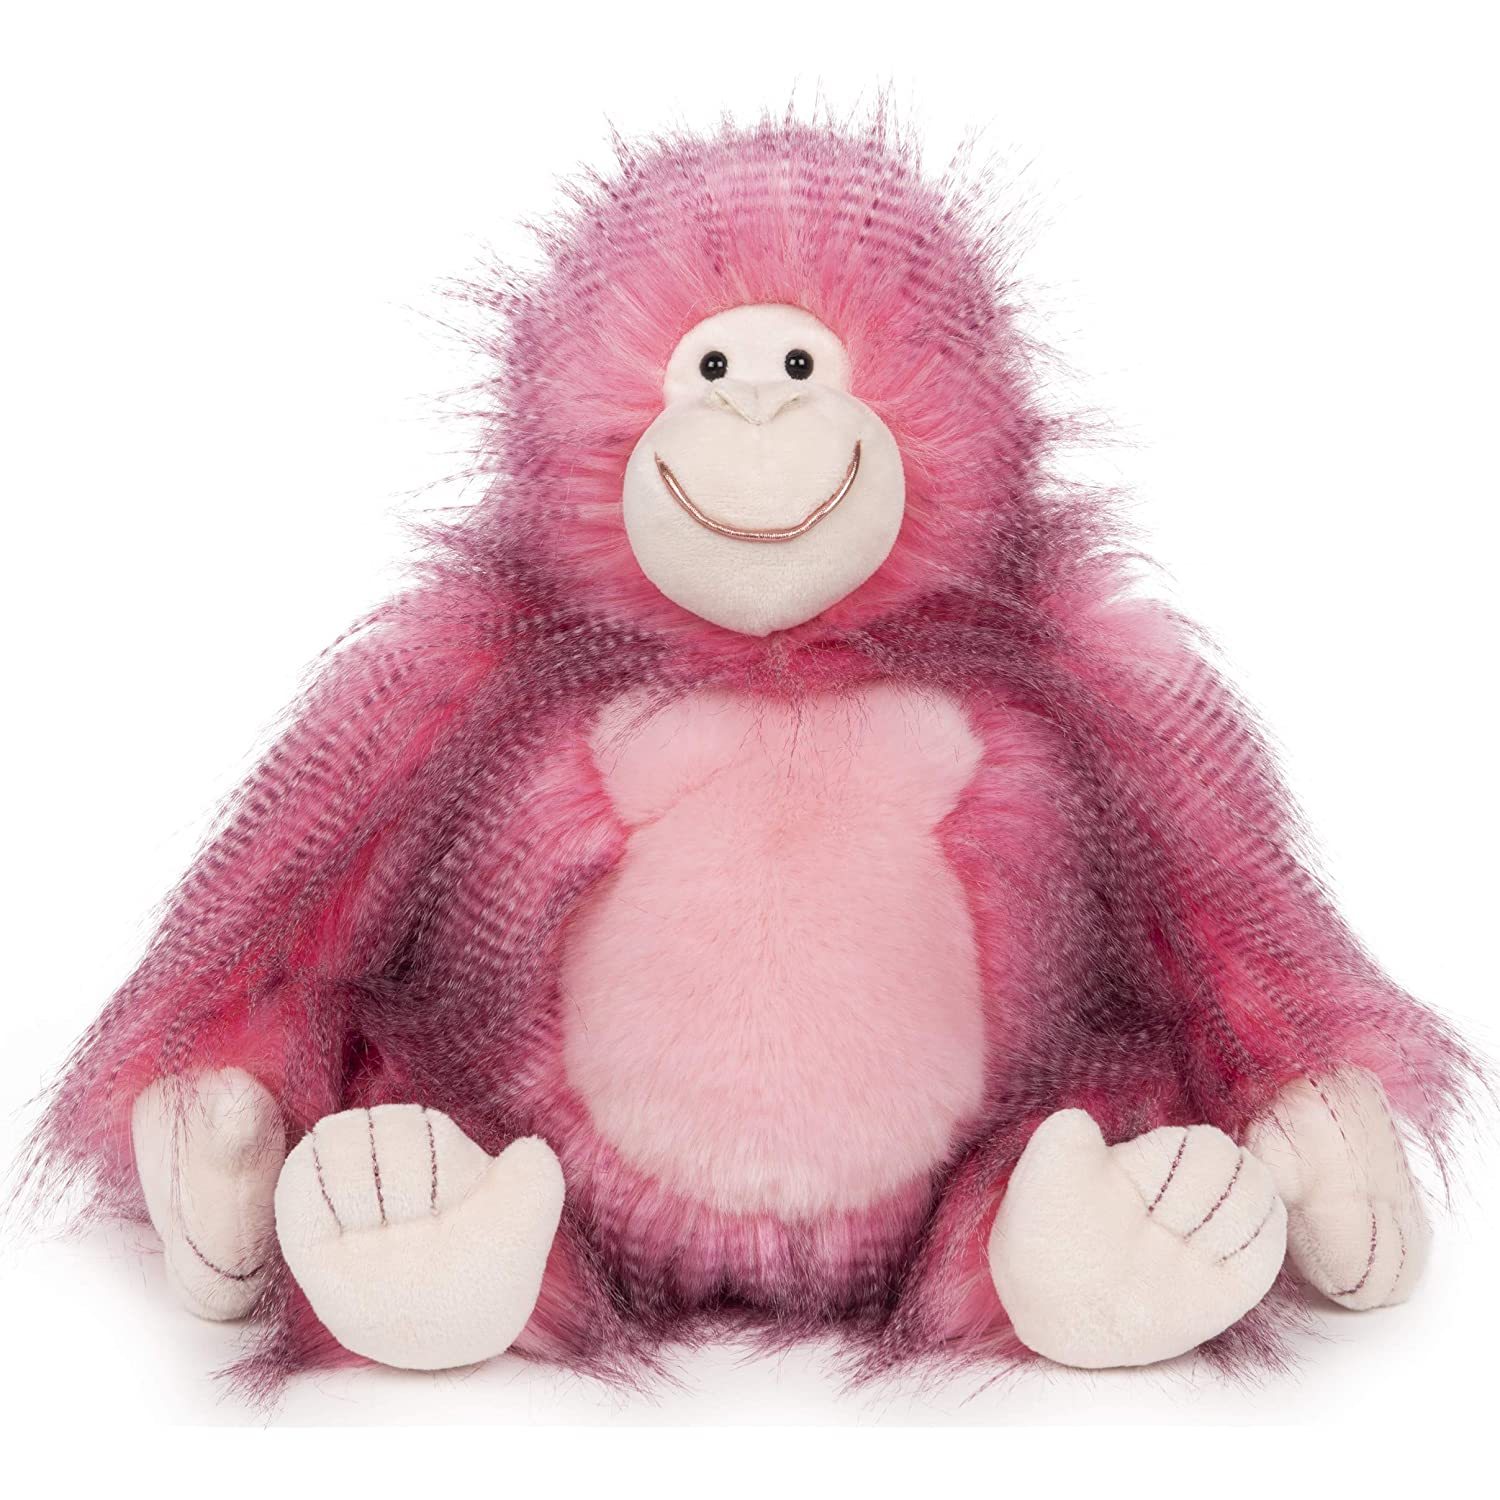 Primary image for Gund Fab Pals Ramona Gorilla For Ages 1 &Up, Pink, 11.5